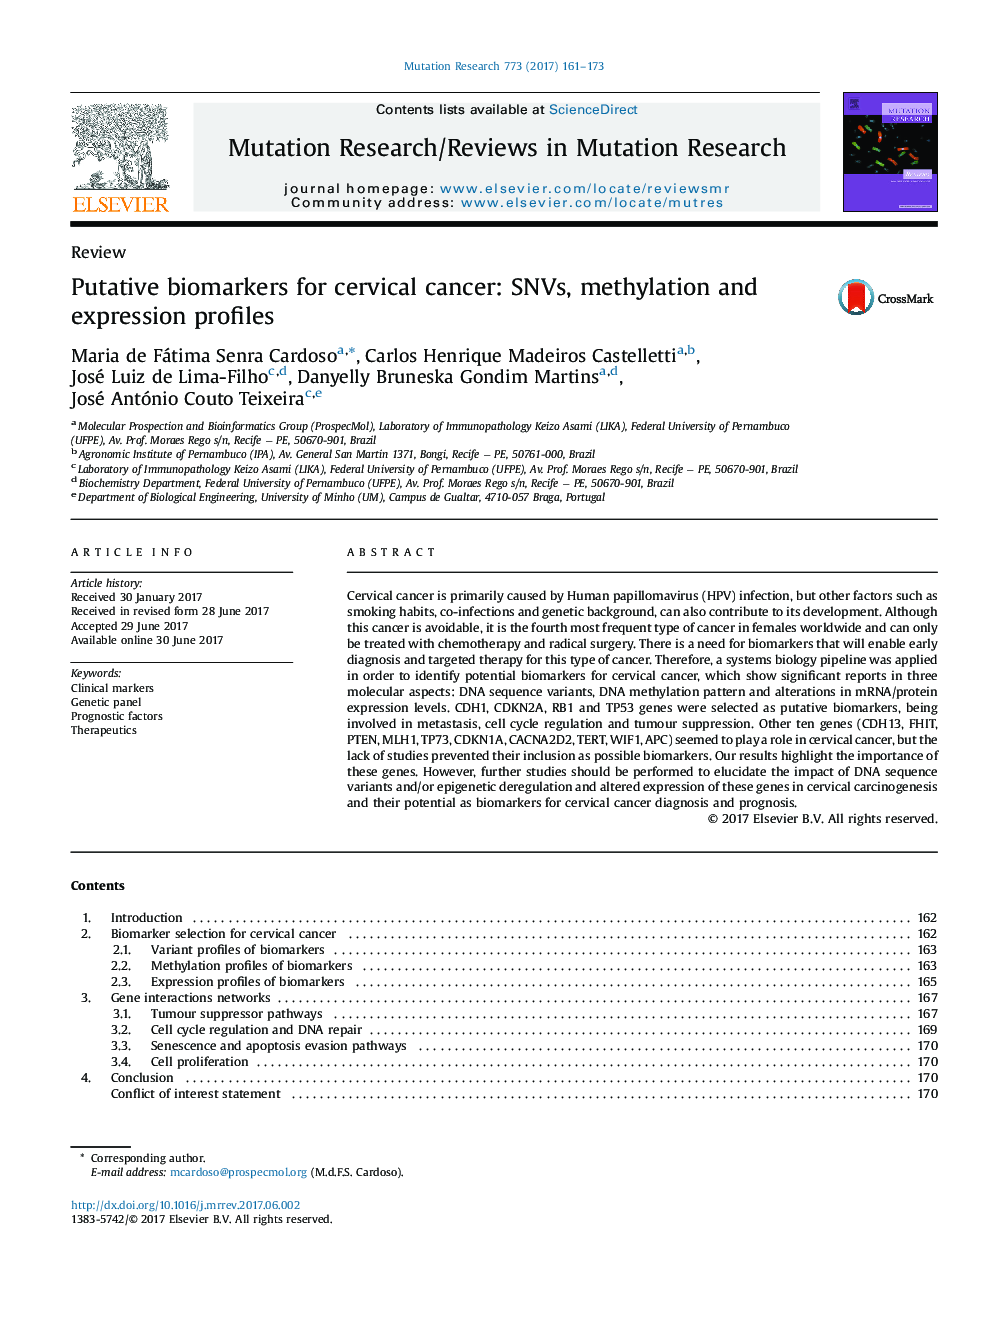 ReviewPutative biomarkers for cervical cancer: SNVs, methylation and expression profiles